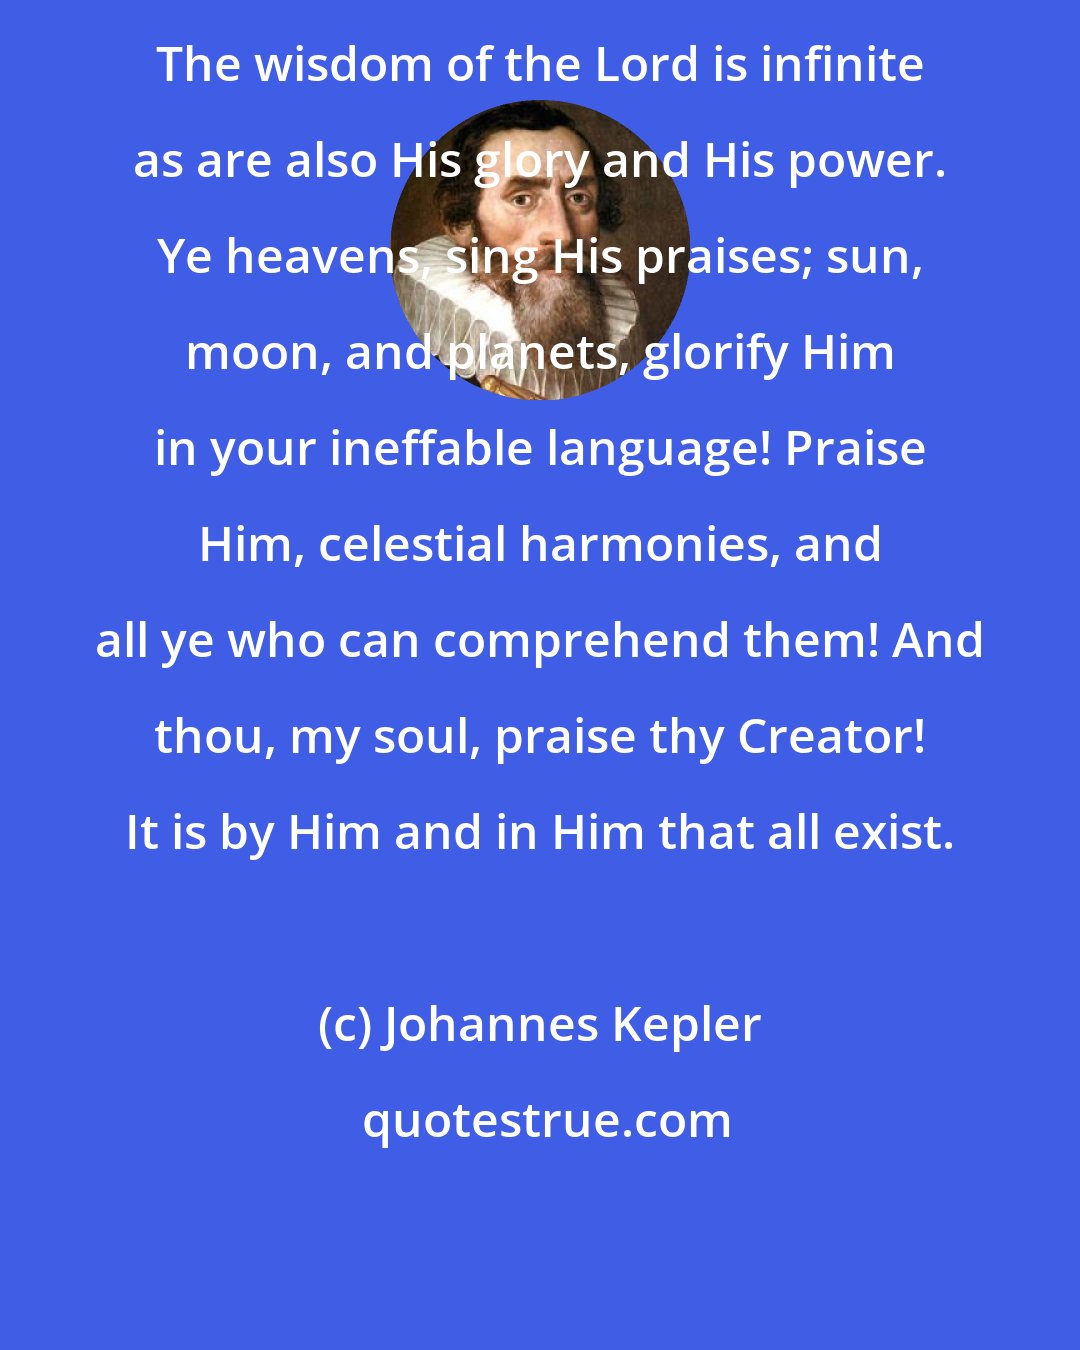 Johannes Kepler: The wisdom of the Lord is infinite as are also His glory and His power. Ye heavens, sing His praises; sun, moon, and planets, glorify Him in your ineffable language! Praise Him, celestial harmonies, and all ye who can comprehend them! And thou, my soul, praise thy Creator! It is by Him and in Him that all exist.